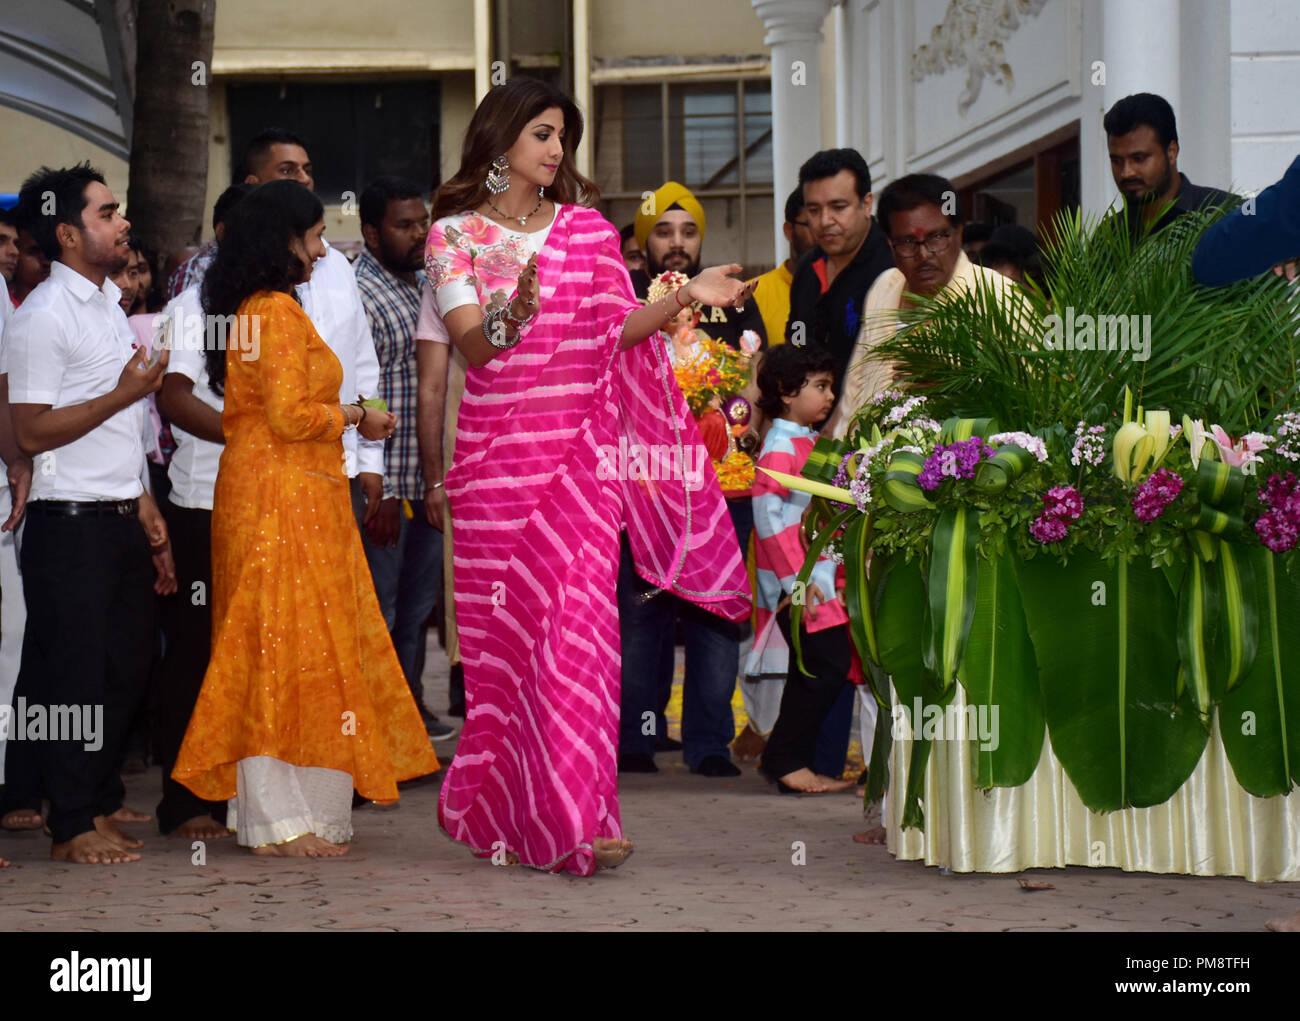 Indian film actress Shilpa Shetty seen rejoicing during a procession at their home. A procession for the immersion of an idol of the elephant-headed Hindu God Lord Ganesh, Hindu devotees take home idols of Lord Ganesha in order to invoke his blessings for wisdom and prosperity. Stock Photo